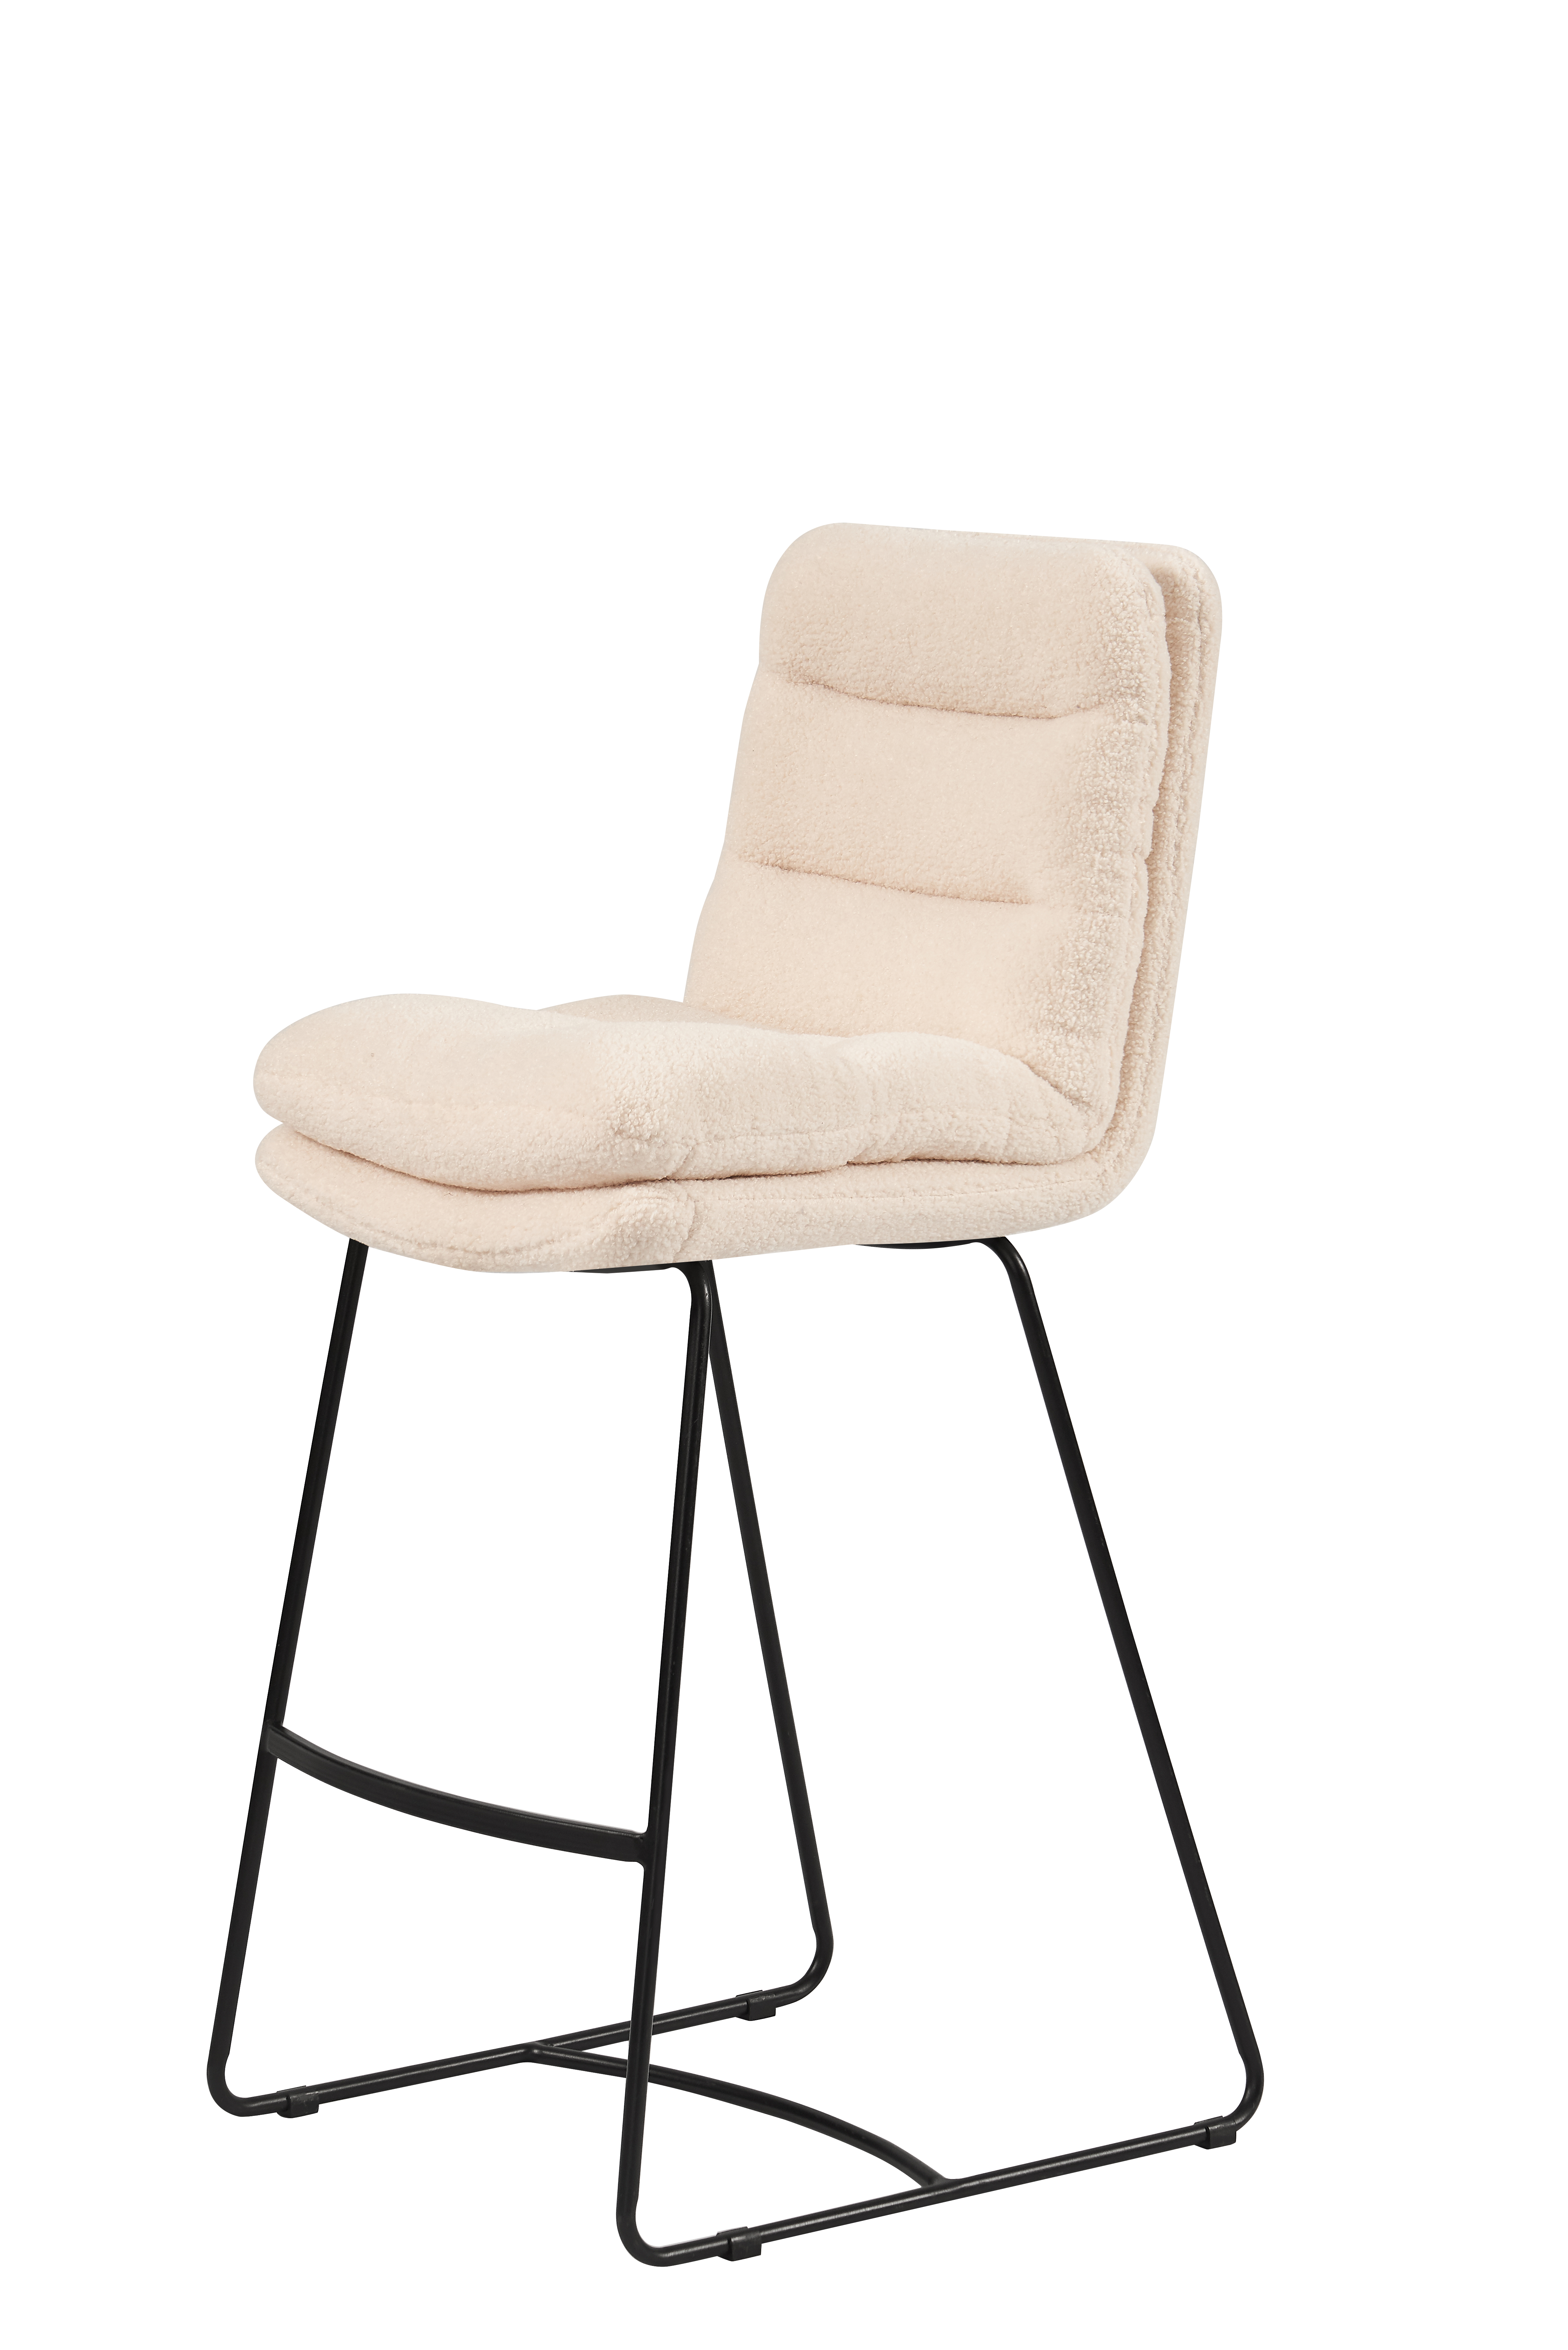 BA-2011 Bar Chair with Teddy fabric Featured Image